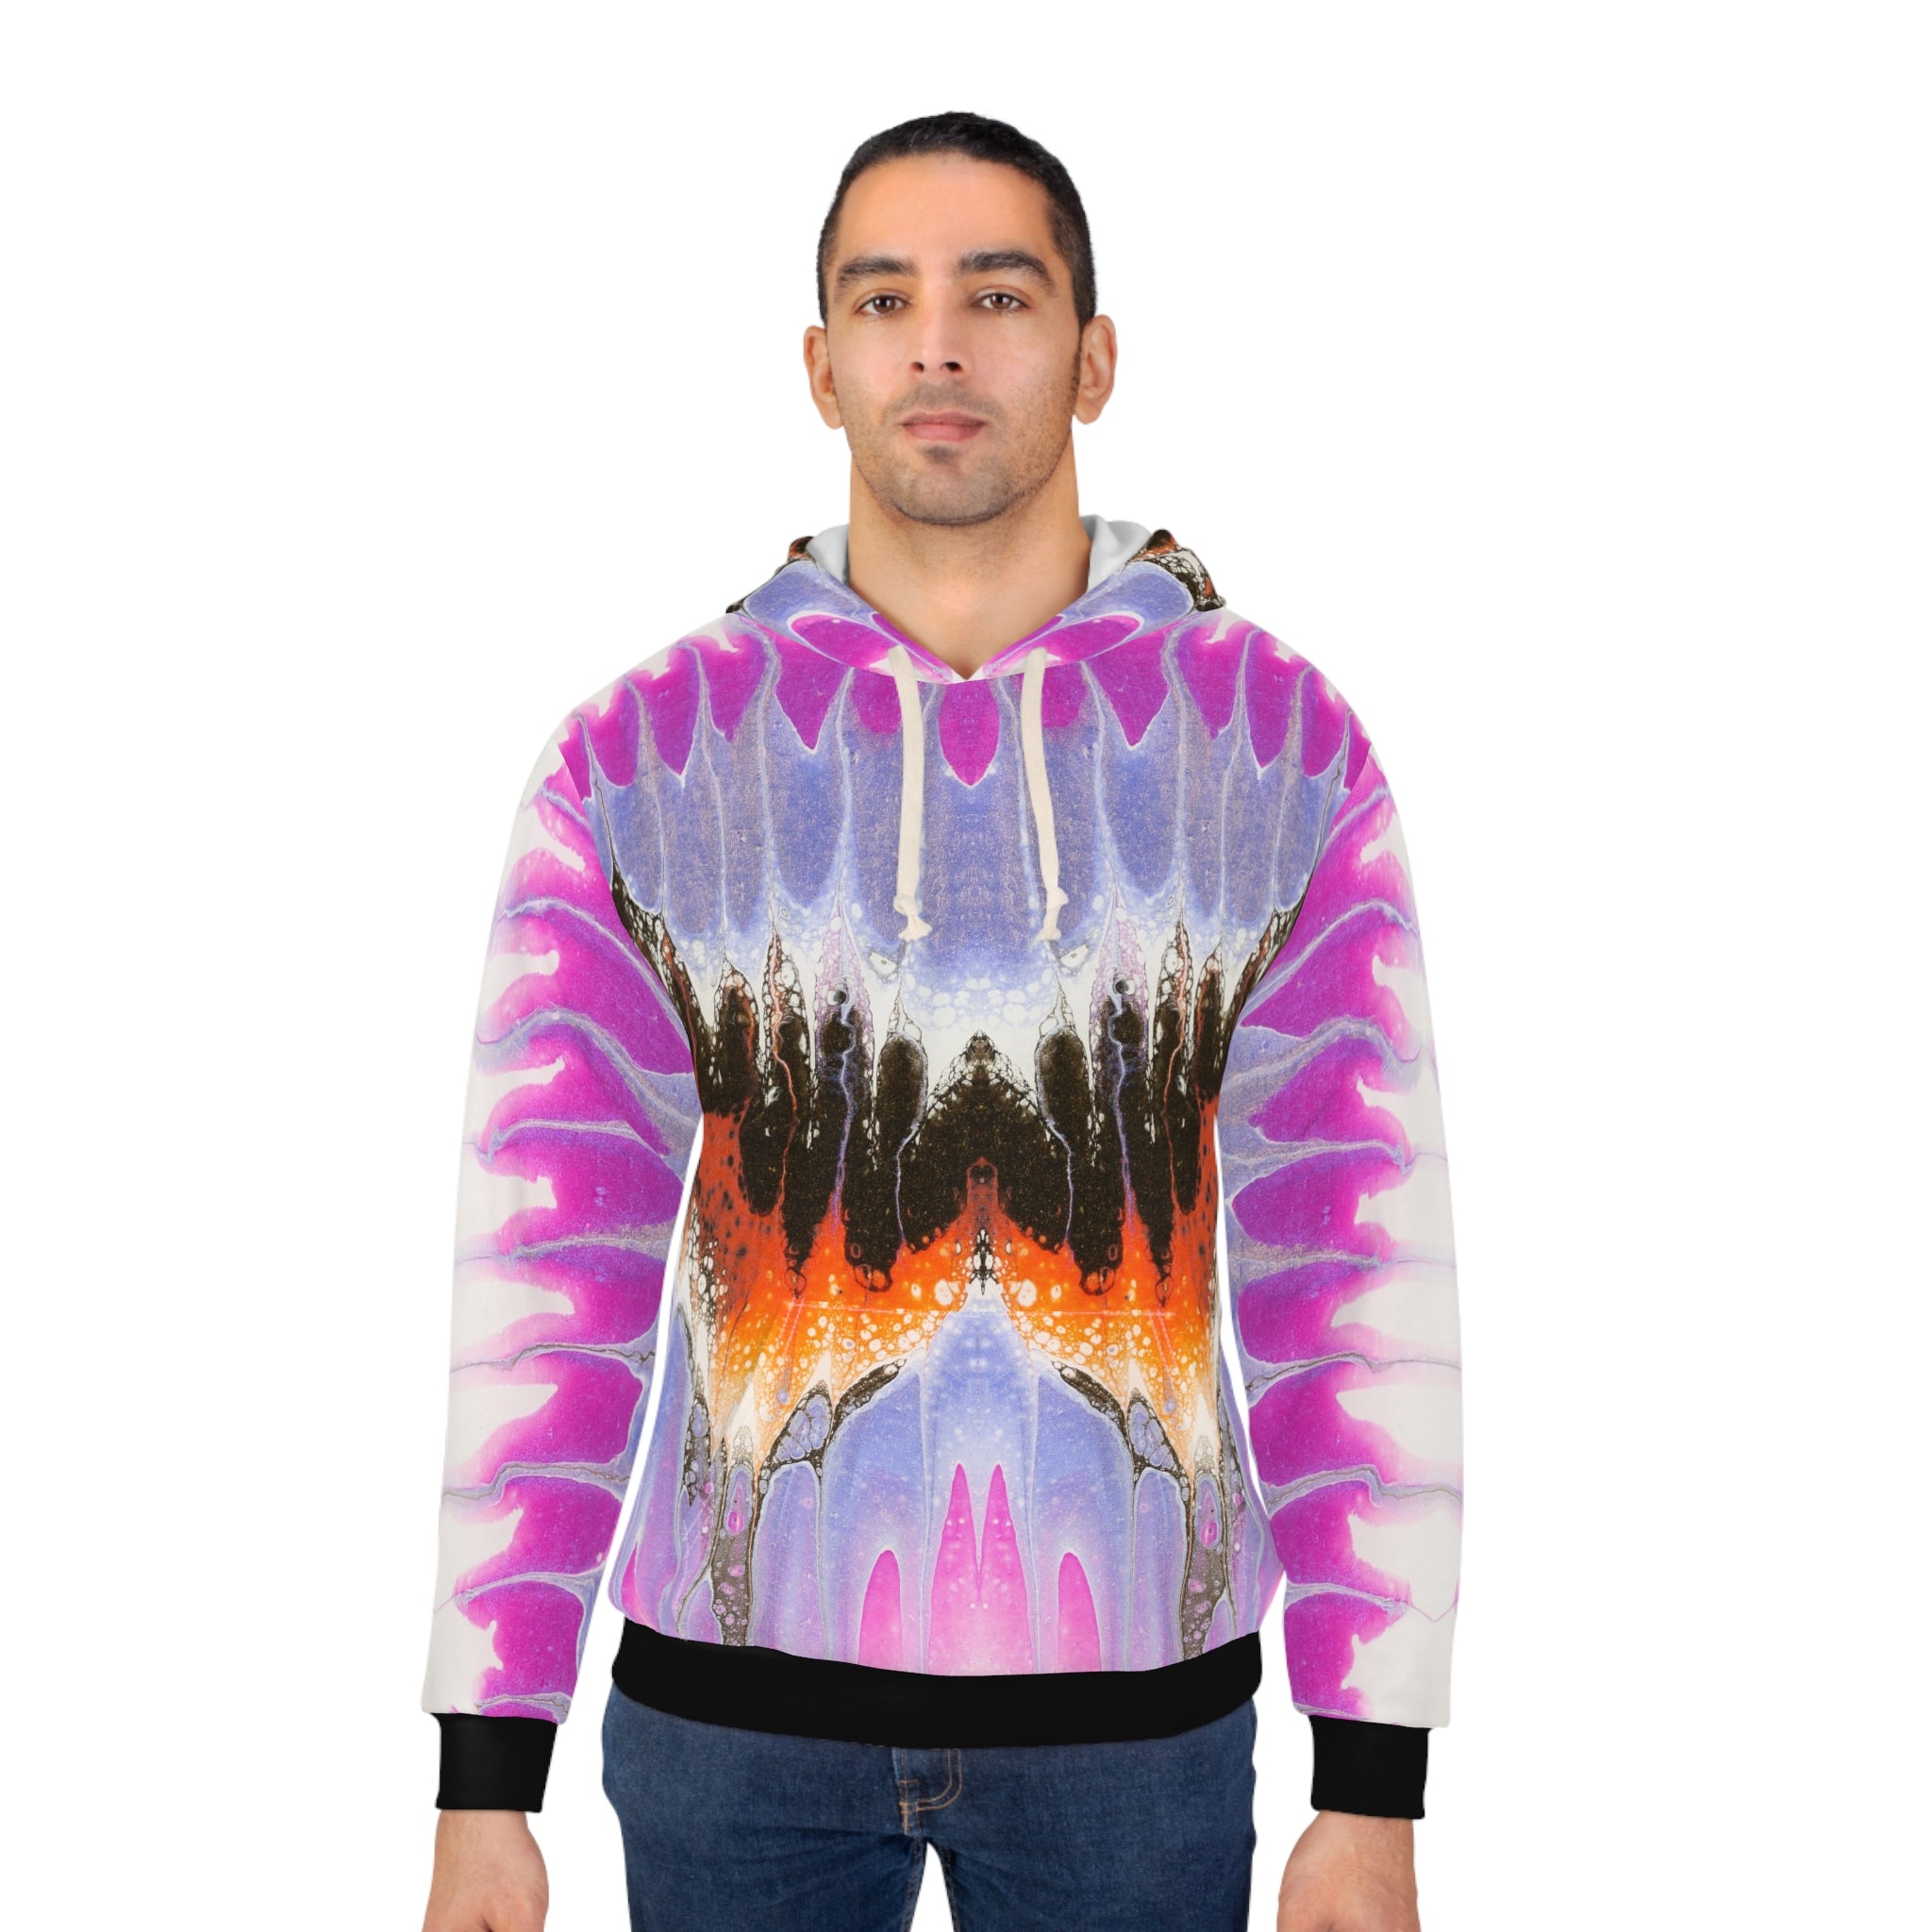 Cameron Creations - Cosmic Audio - Pullover Hoodie - Male